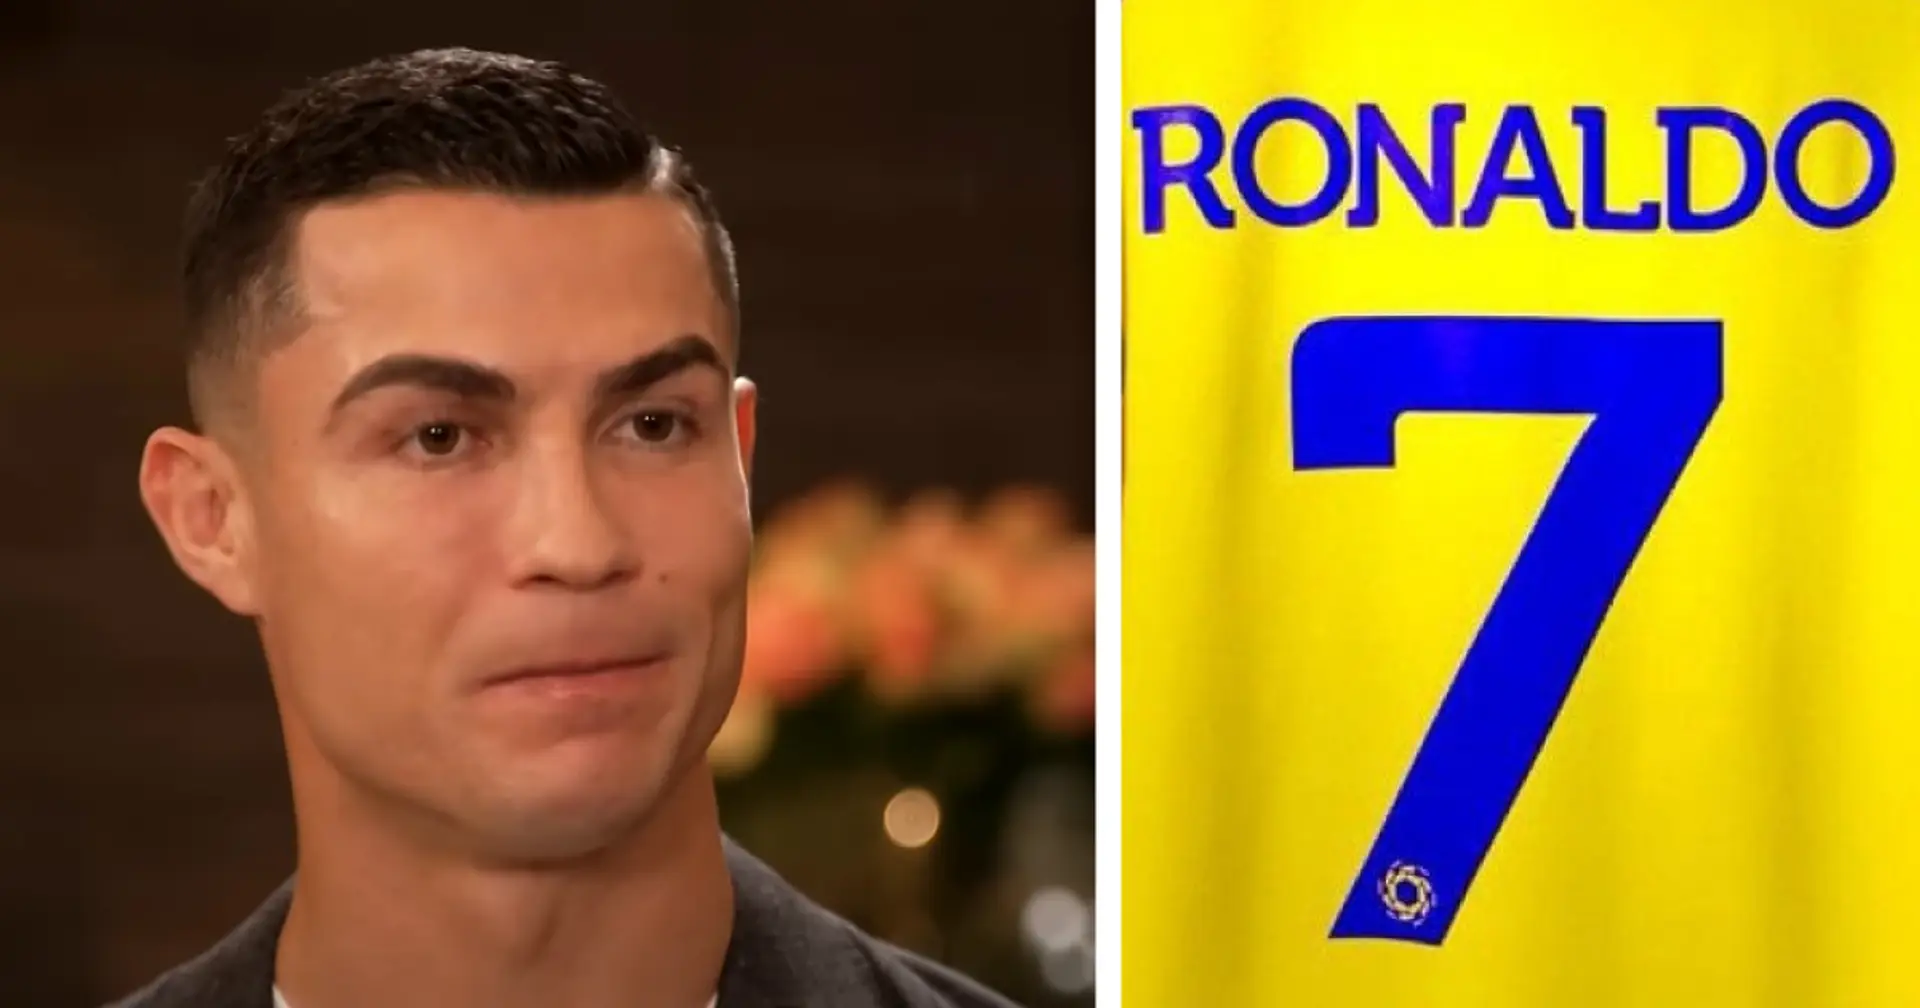 Cristiano Ronaldo set to sign 7-year deal with Al-Nassr — explained